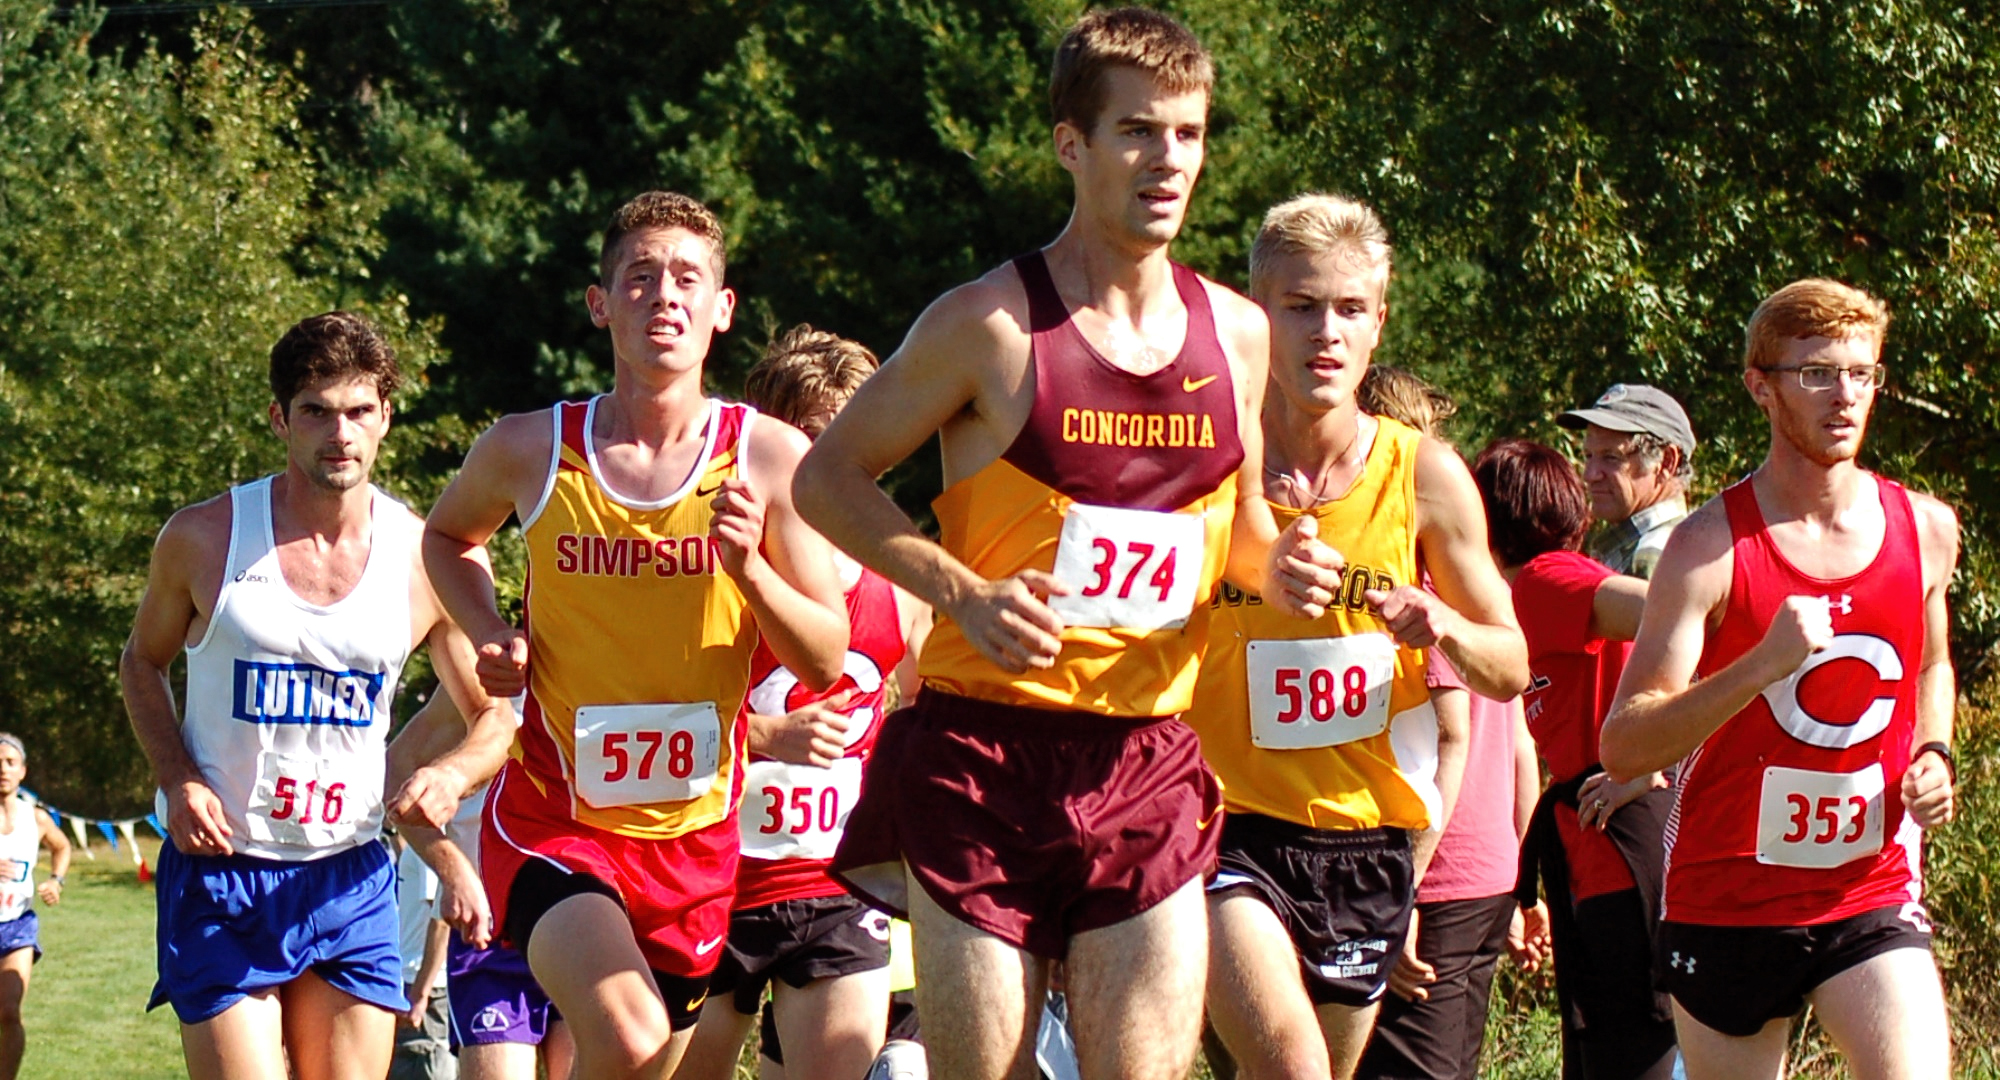 Senior Matthew Lillehaugen led the Cobbers at the NCAA Central Region Meet. Lillehaugen improved on his time and place from last year's regional meet.